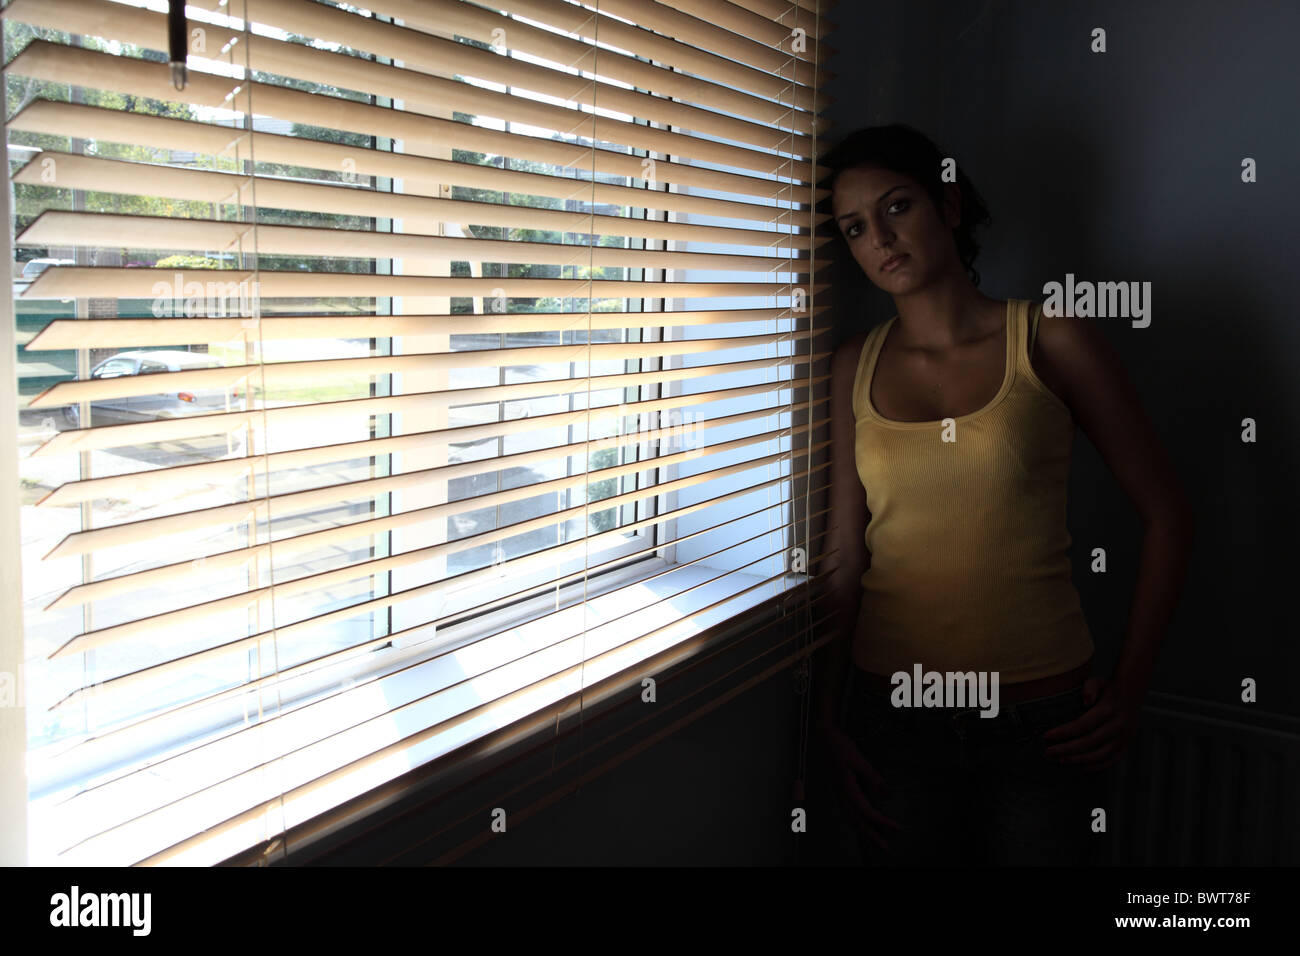 Young woman standing alone in a dark room with a venetian blind, looking towards camera. Stock Photo